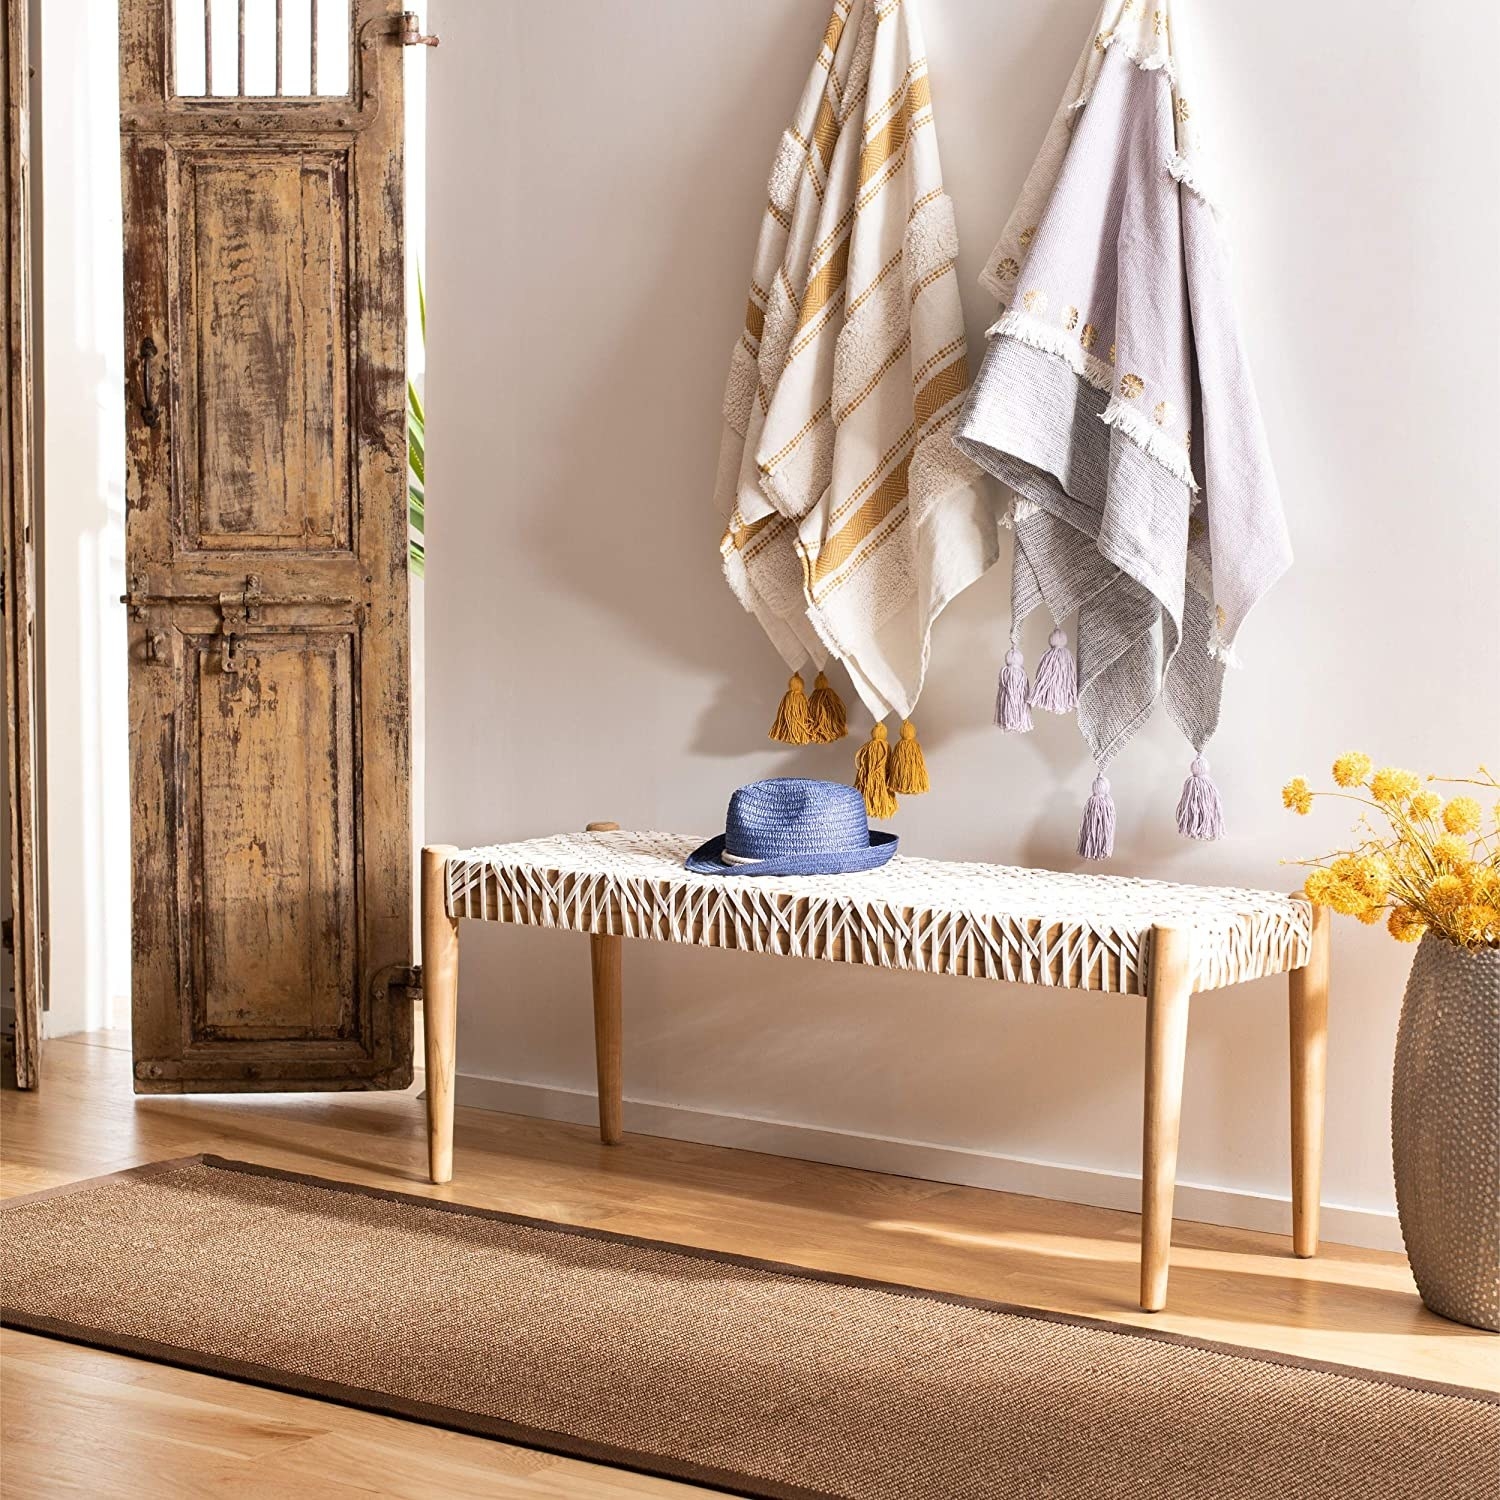 the tan wood bench with a white woven seat